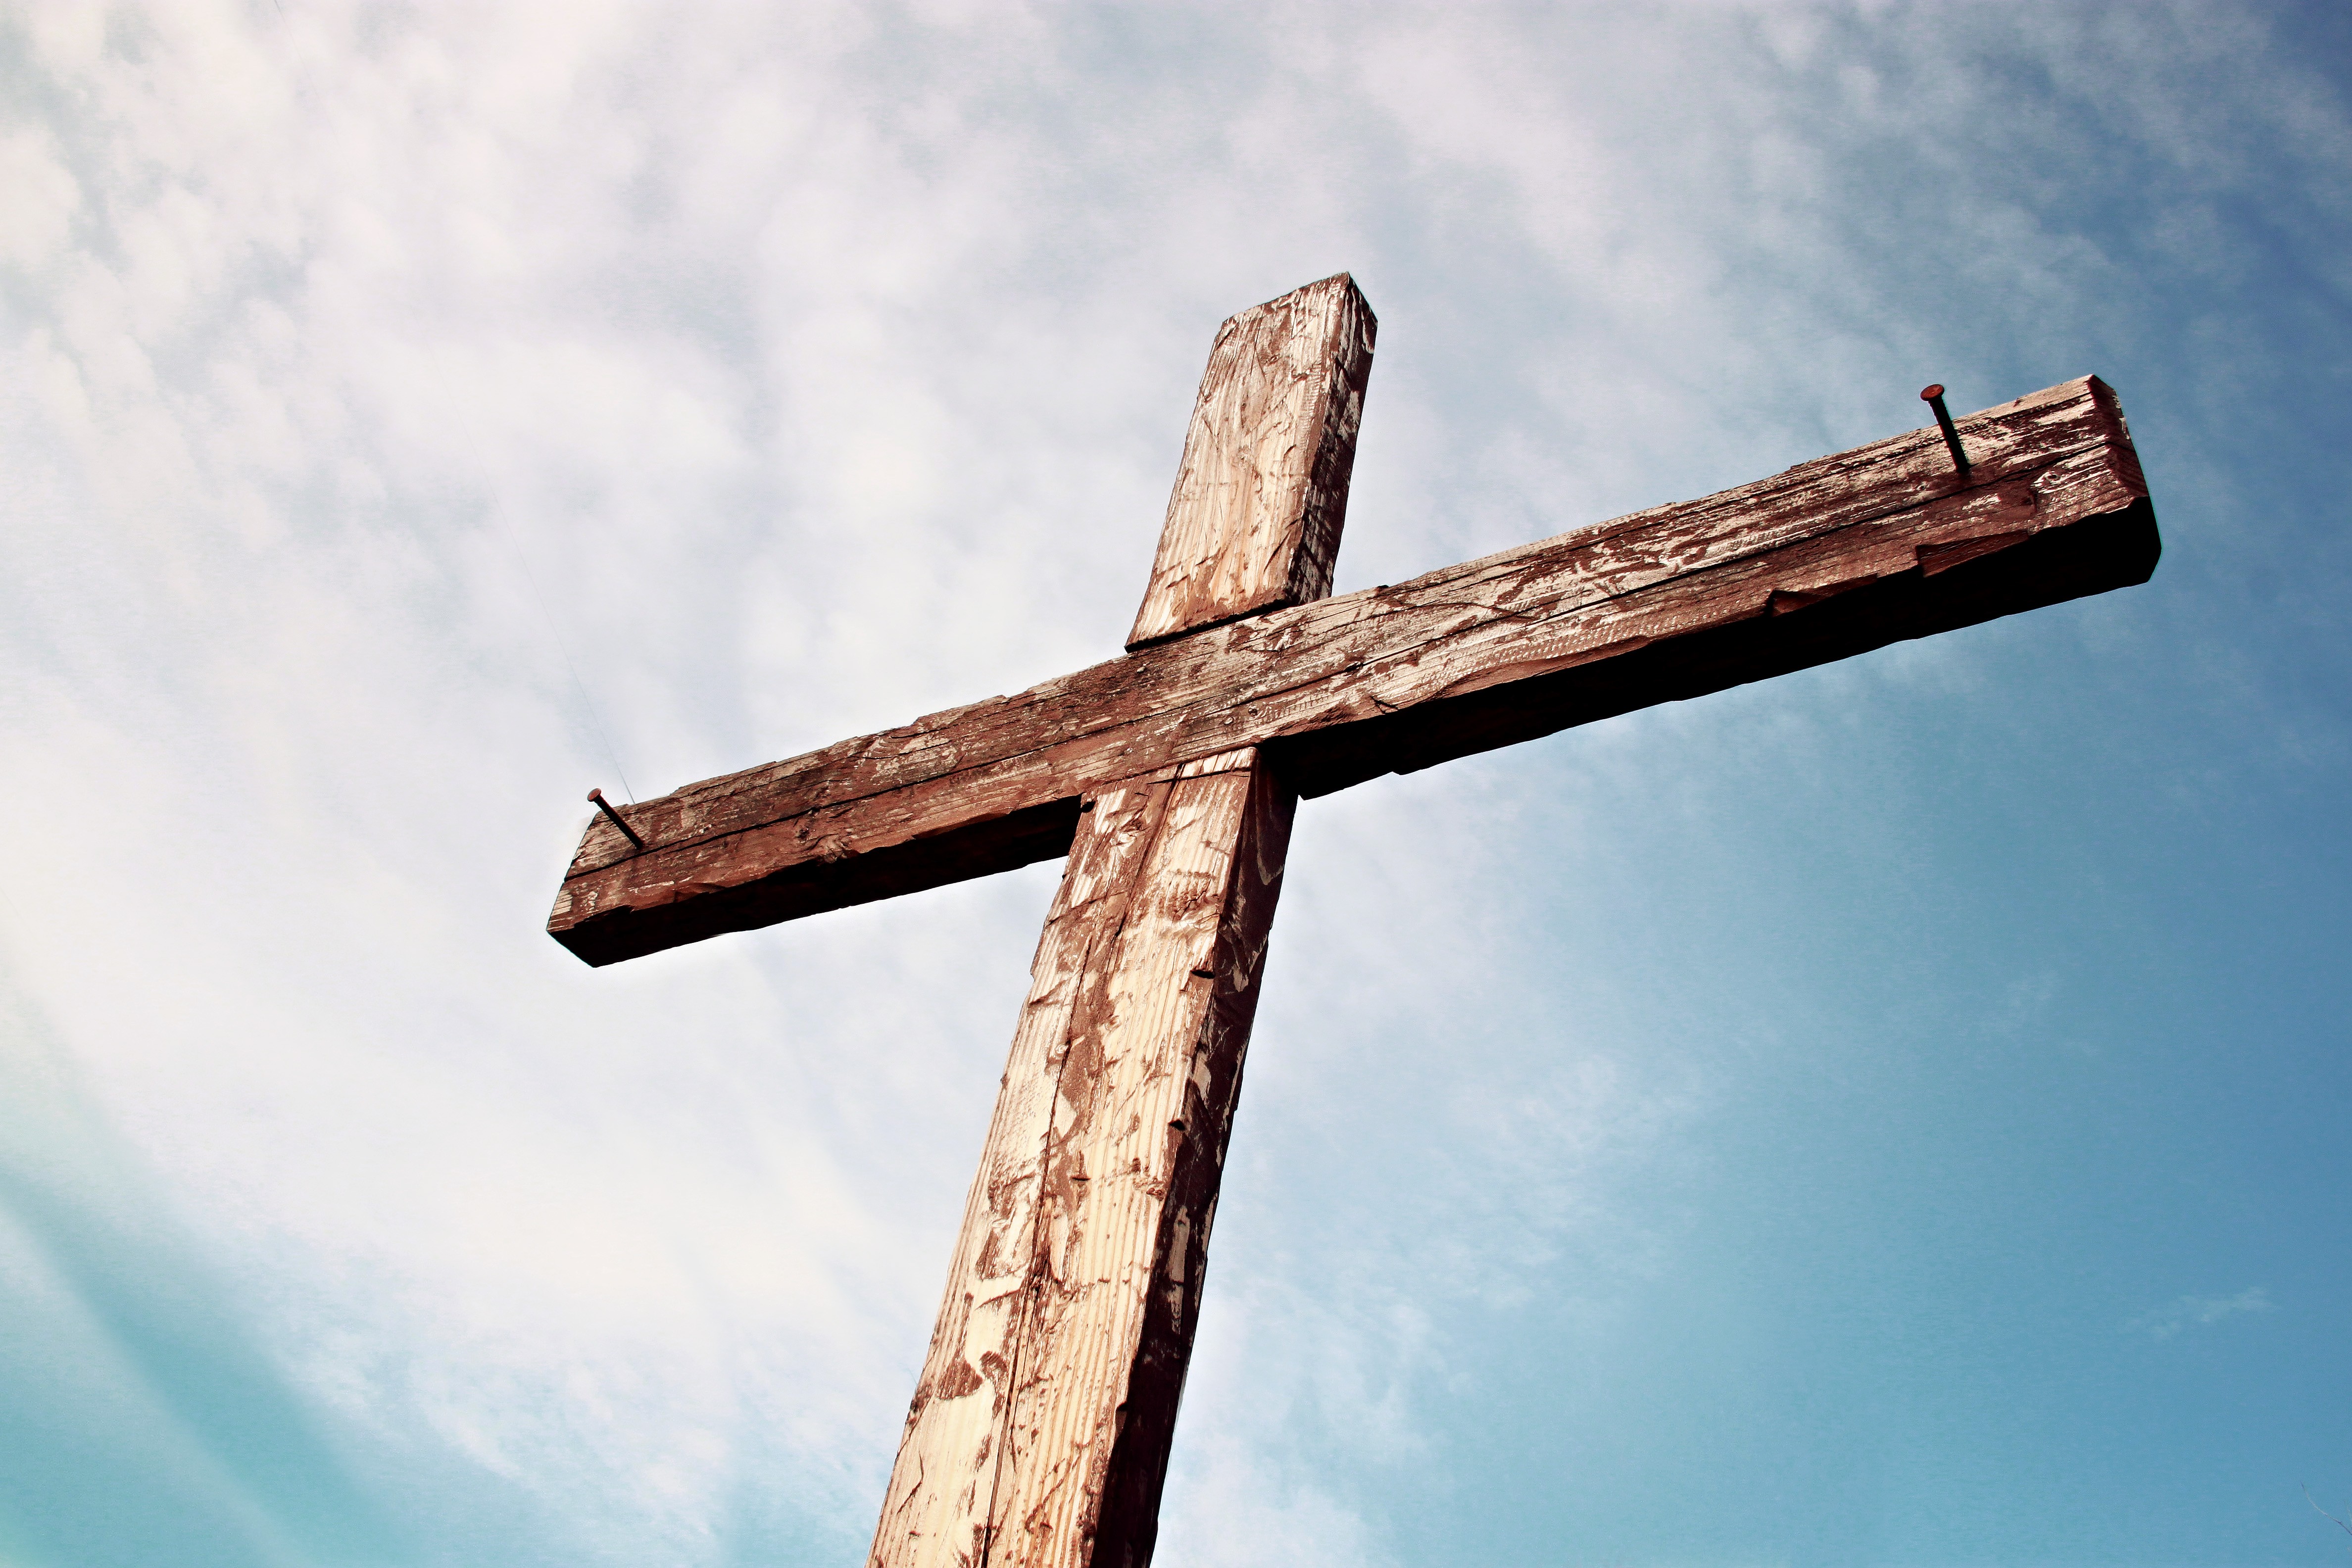 On a hill far away stood an old rugged cross,
the emblem of suffering and shame;
and I love that old cross where the dearest and best
for a world of lost sinners was slain.